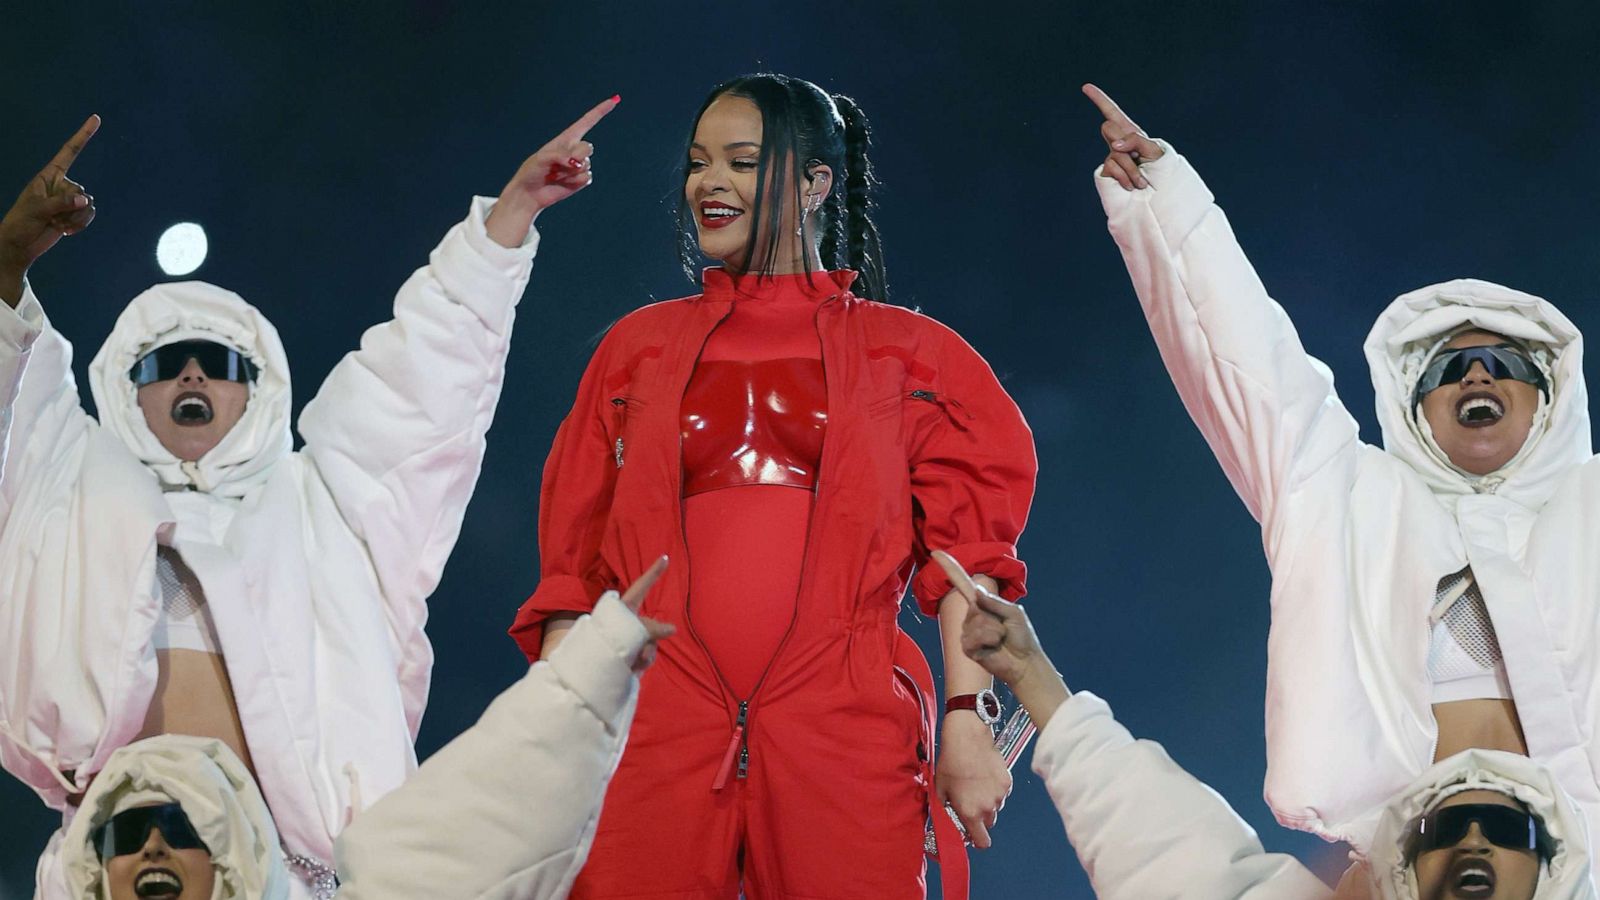 Inside Rihanna's red hot Super Bowl 2023 style: All the glam details